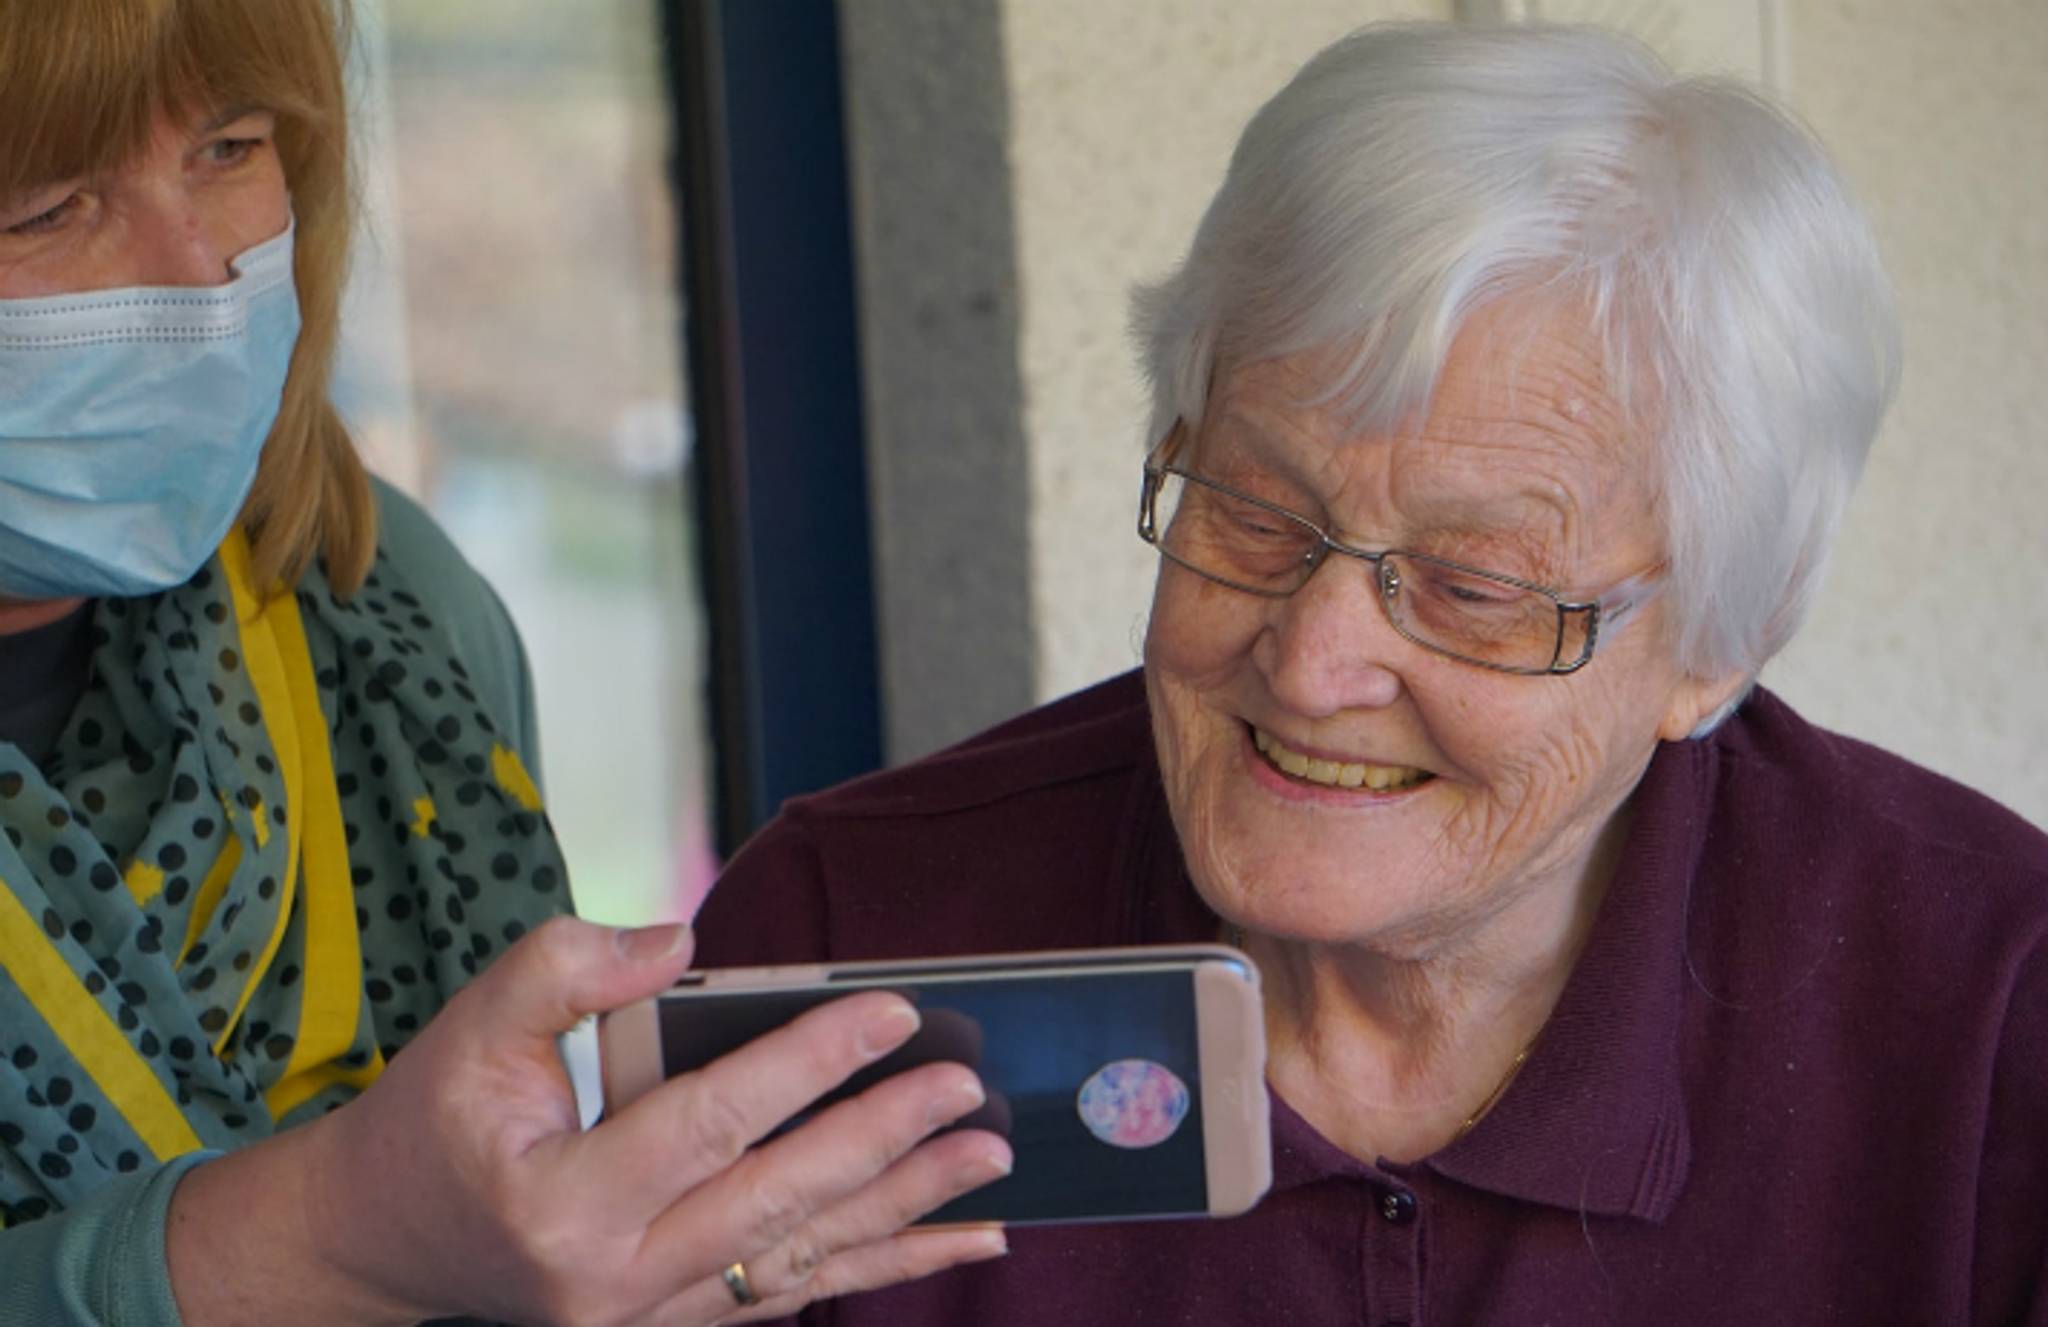 CareApp connects isolated Seniors to families